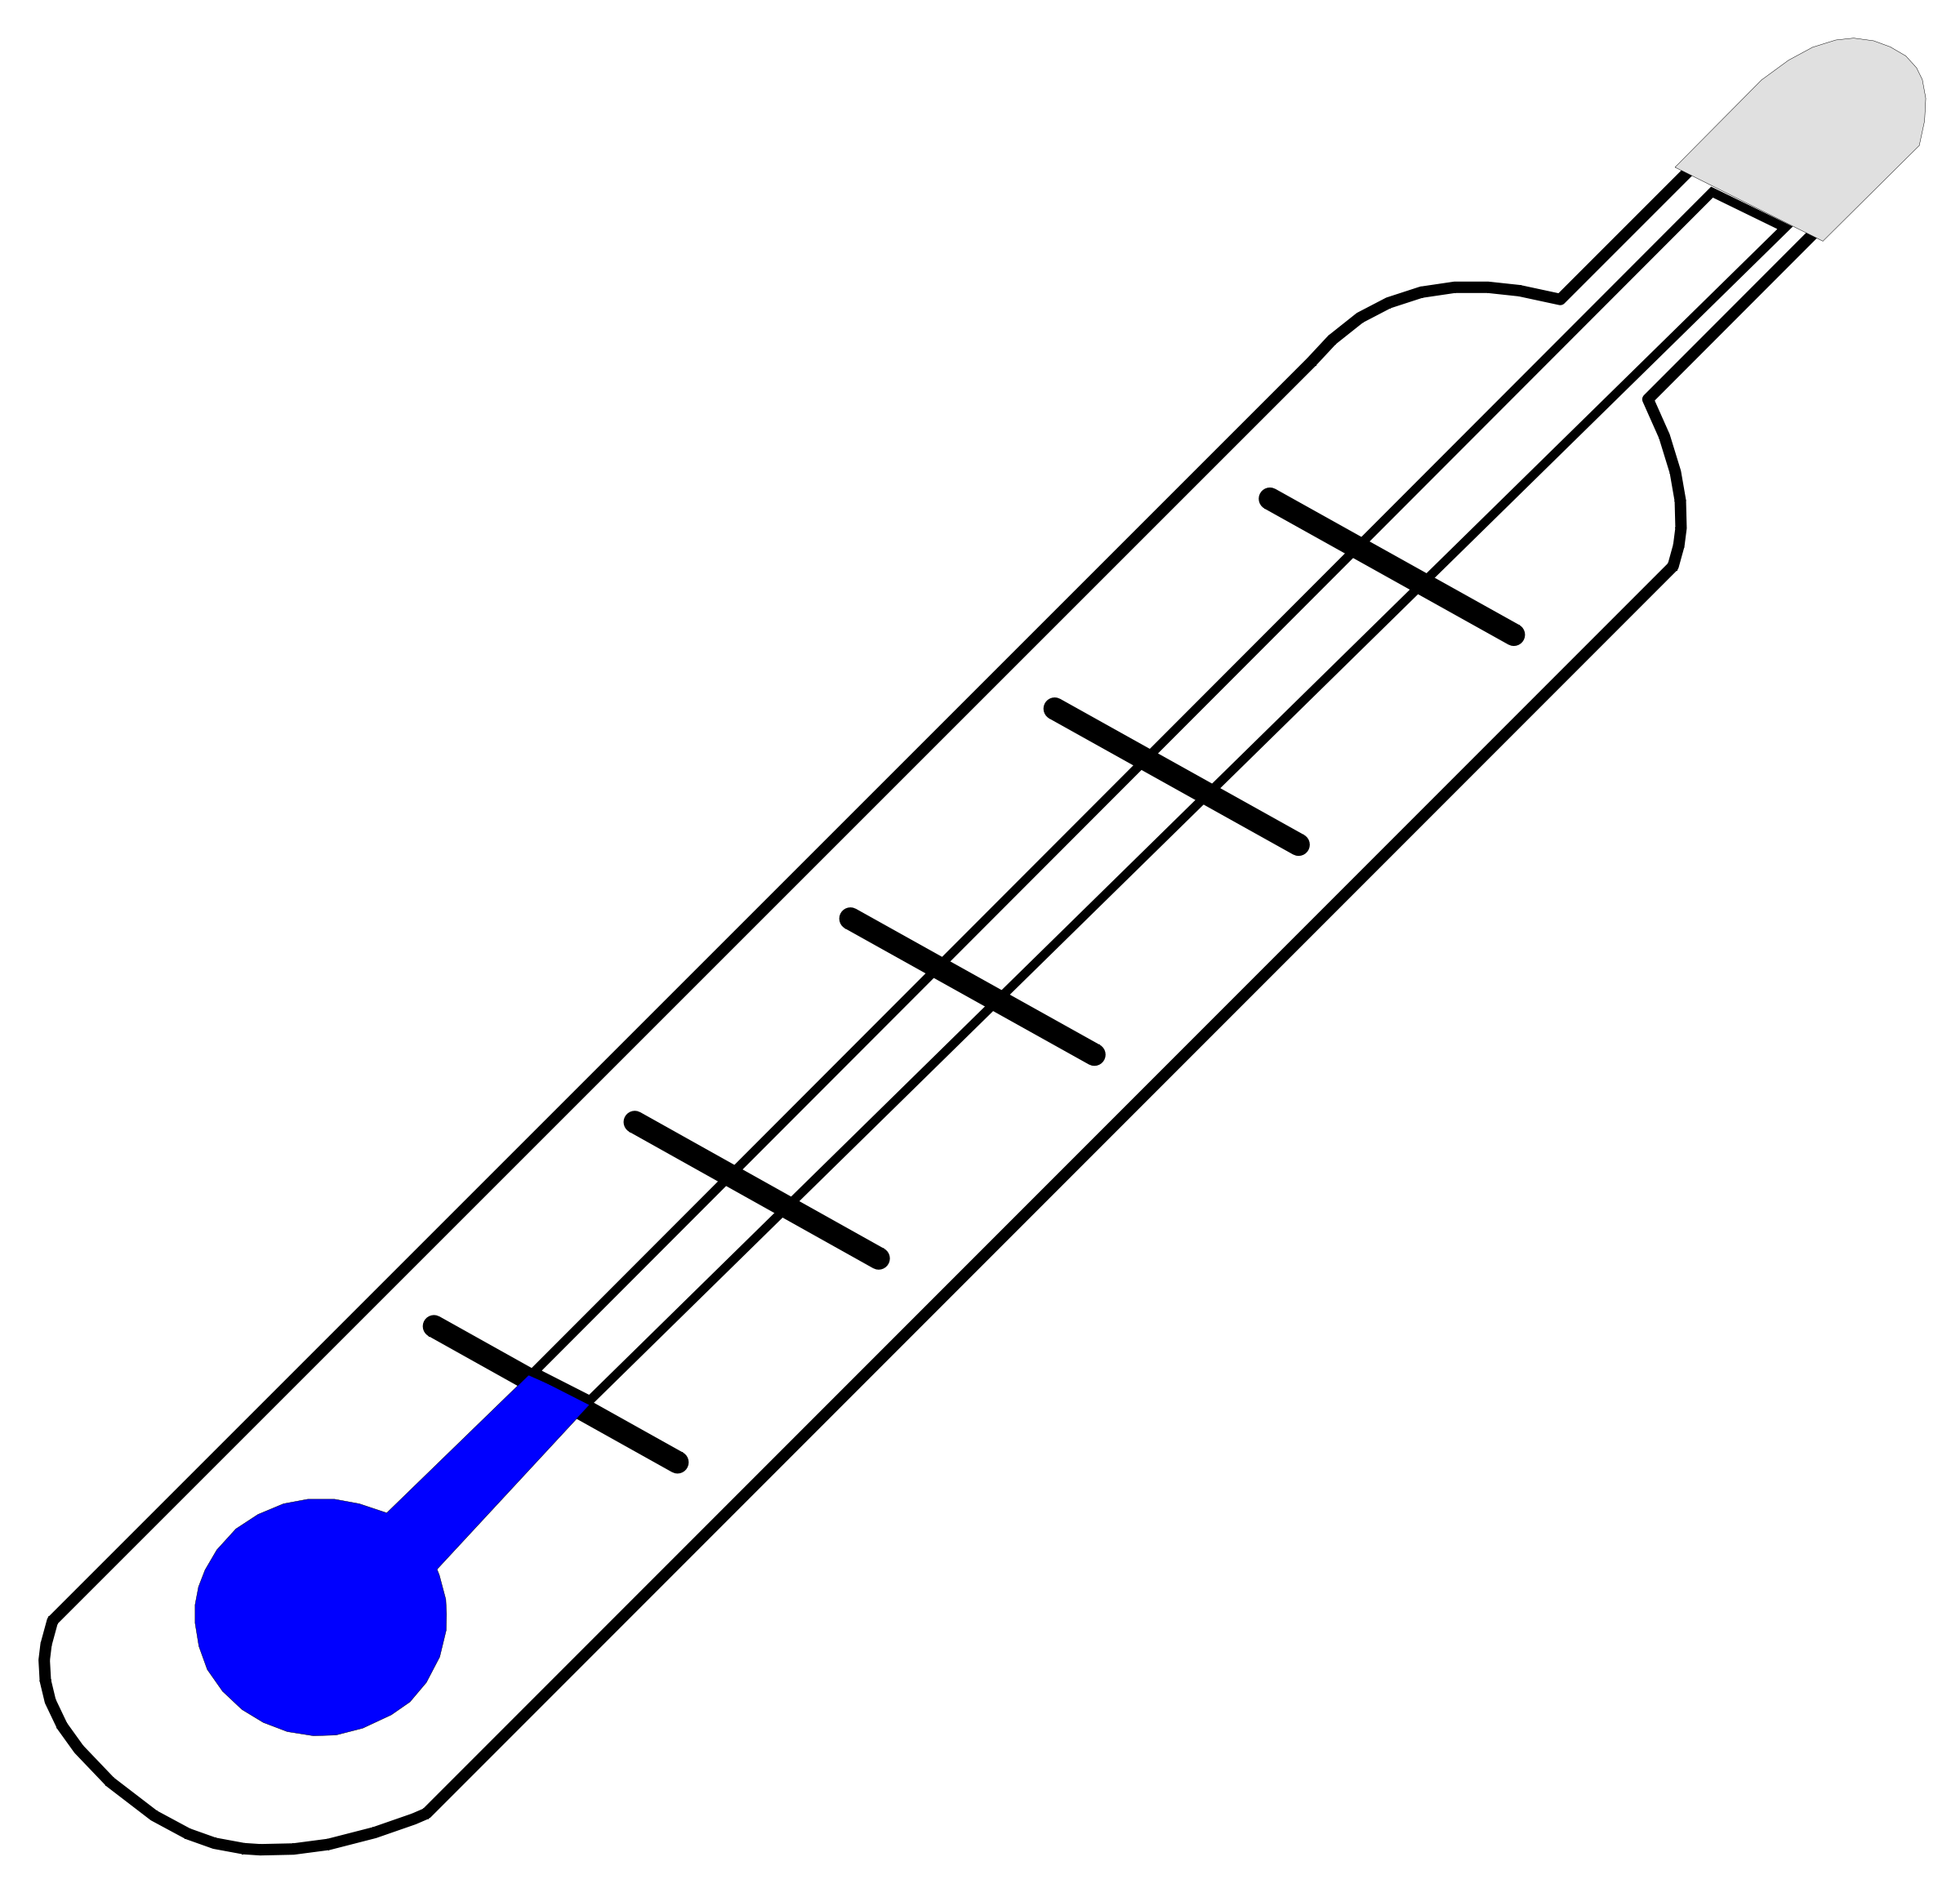 Frozen thermometer clip art free clipart images.